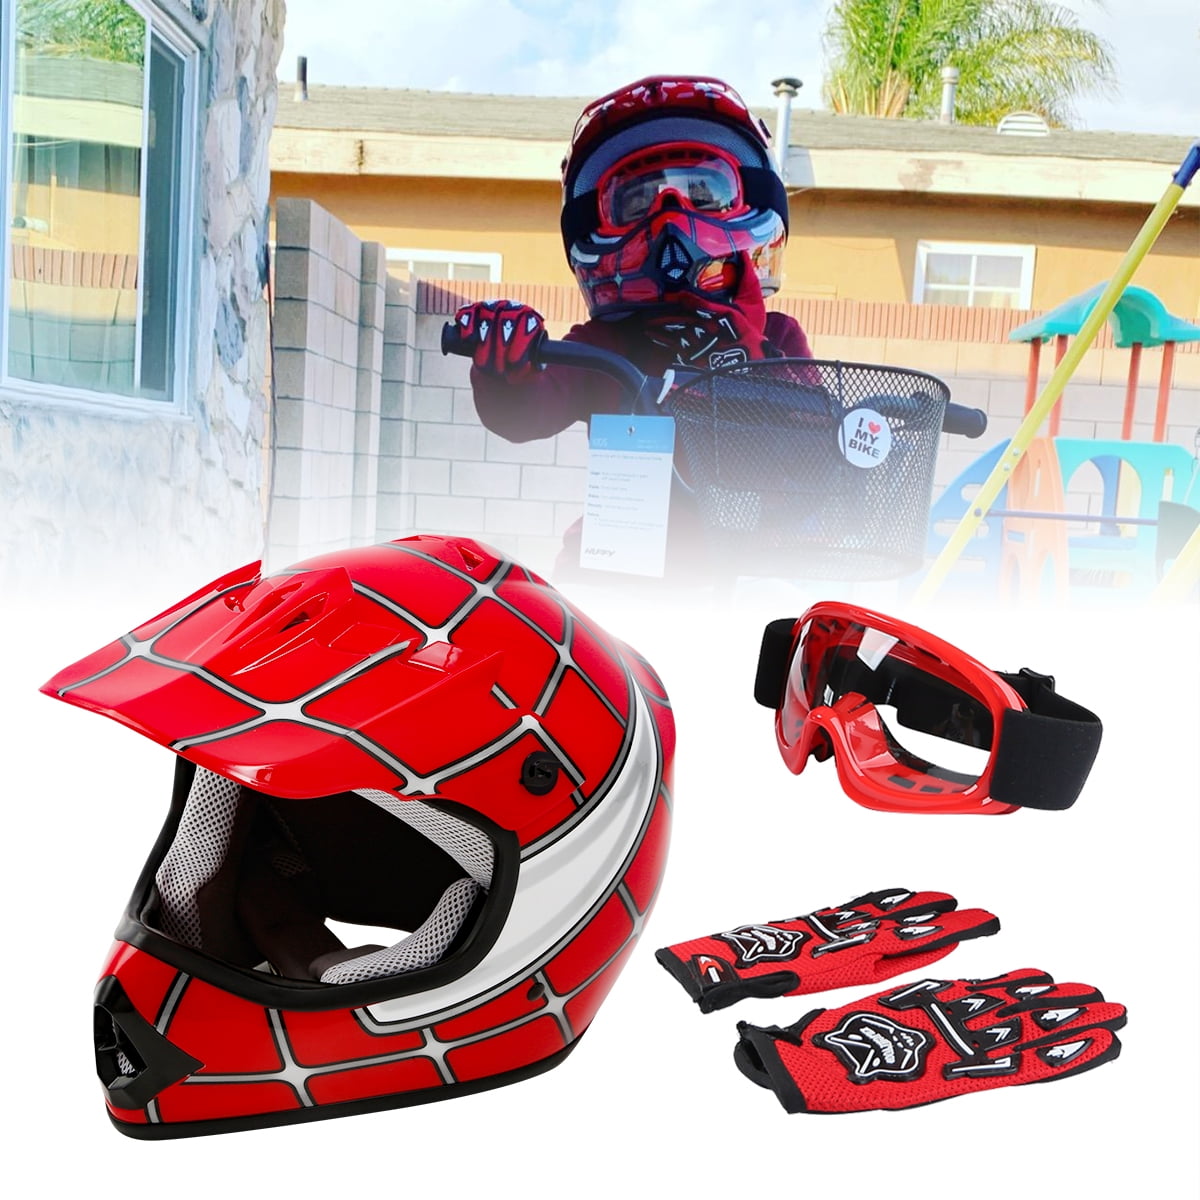 TCMT Helmet for Kids Red Spider Net with Goggles and Gloves DOT Youth  helmet for Atv Mx Motocross Offroad Street Dirt Bike XL Size